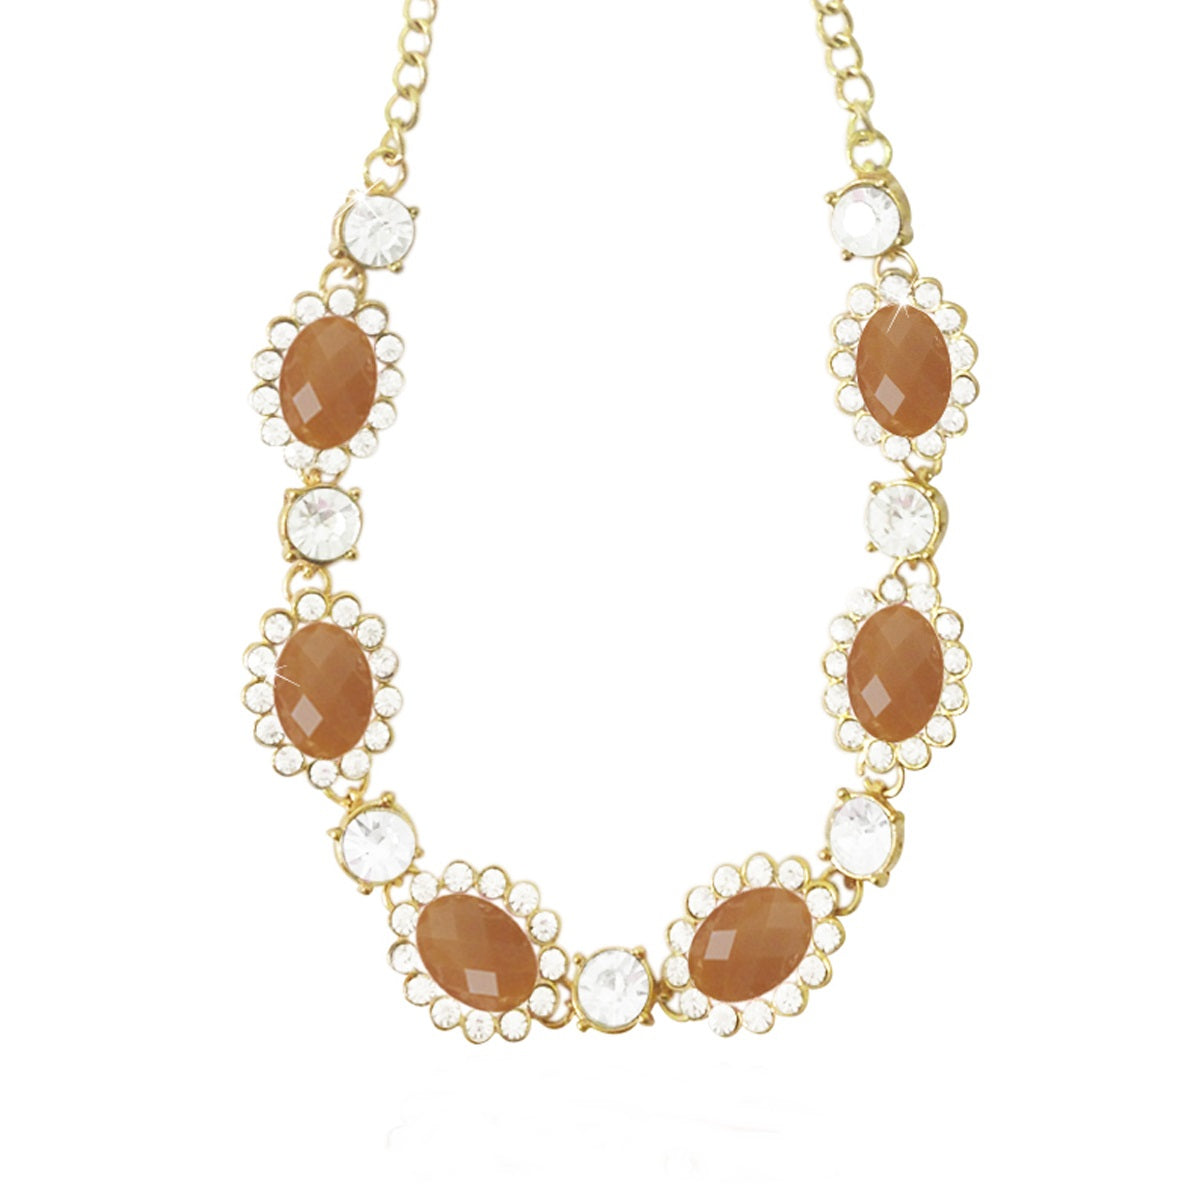 Wrapables Faceted Oval Gemstone and Crystal Necklace